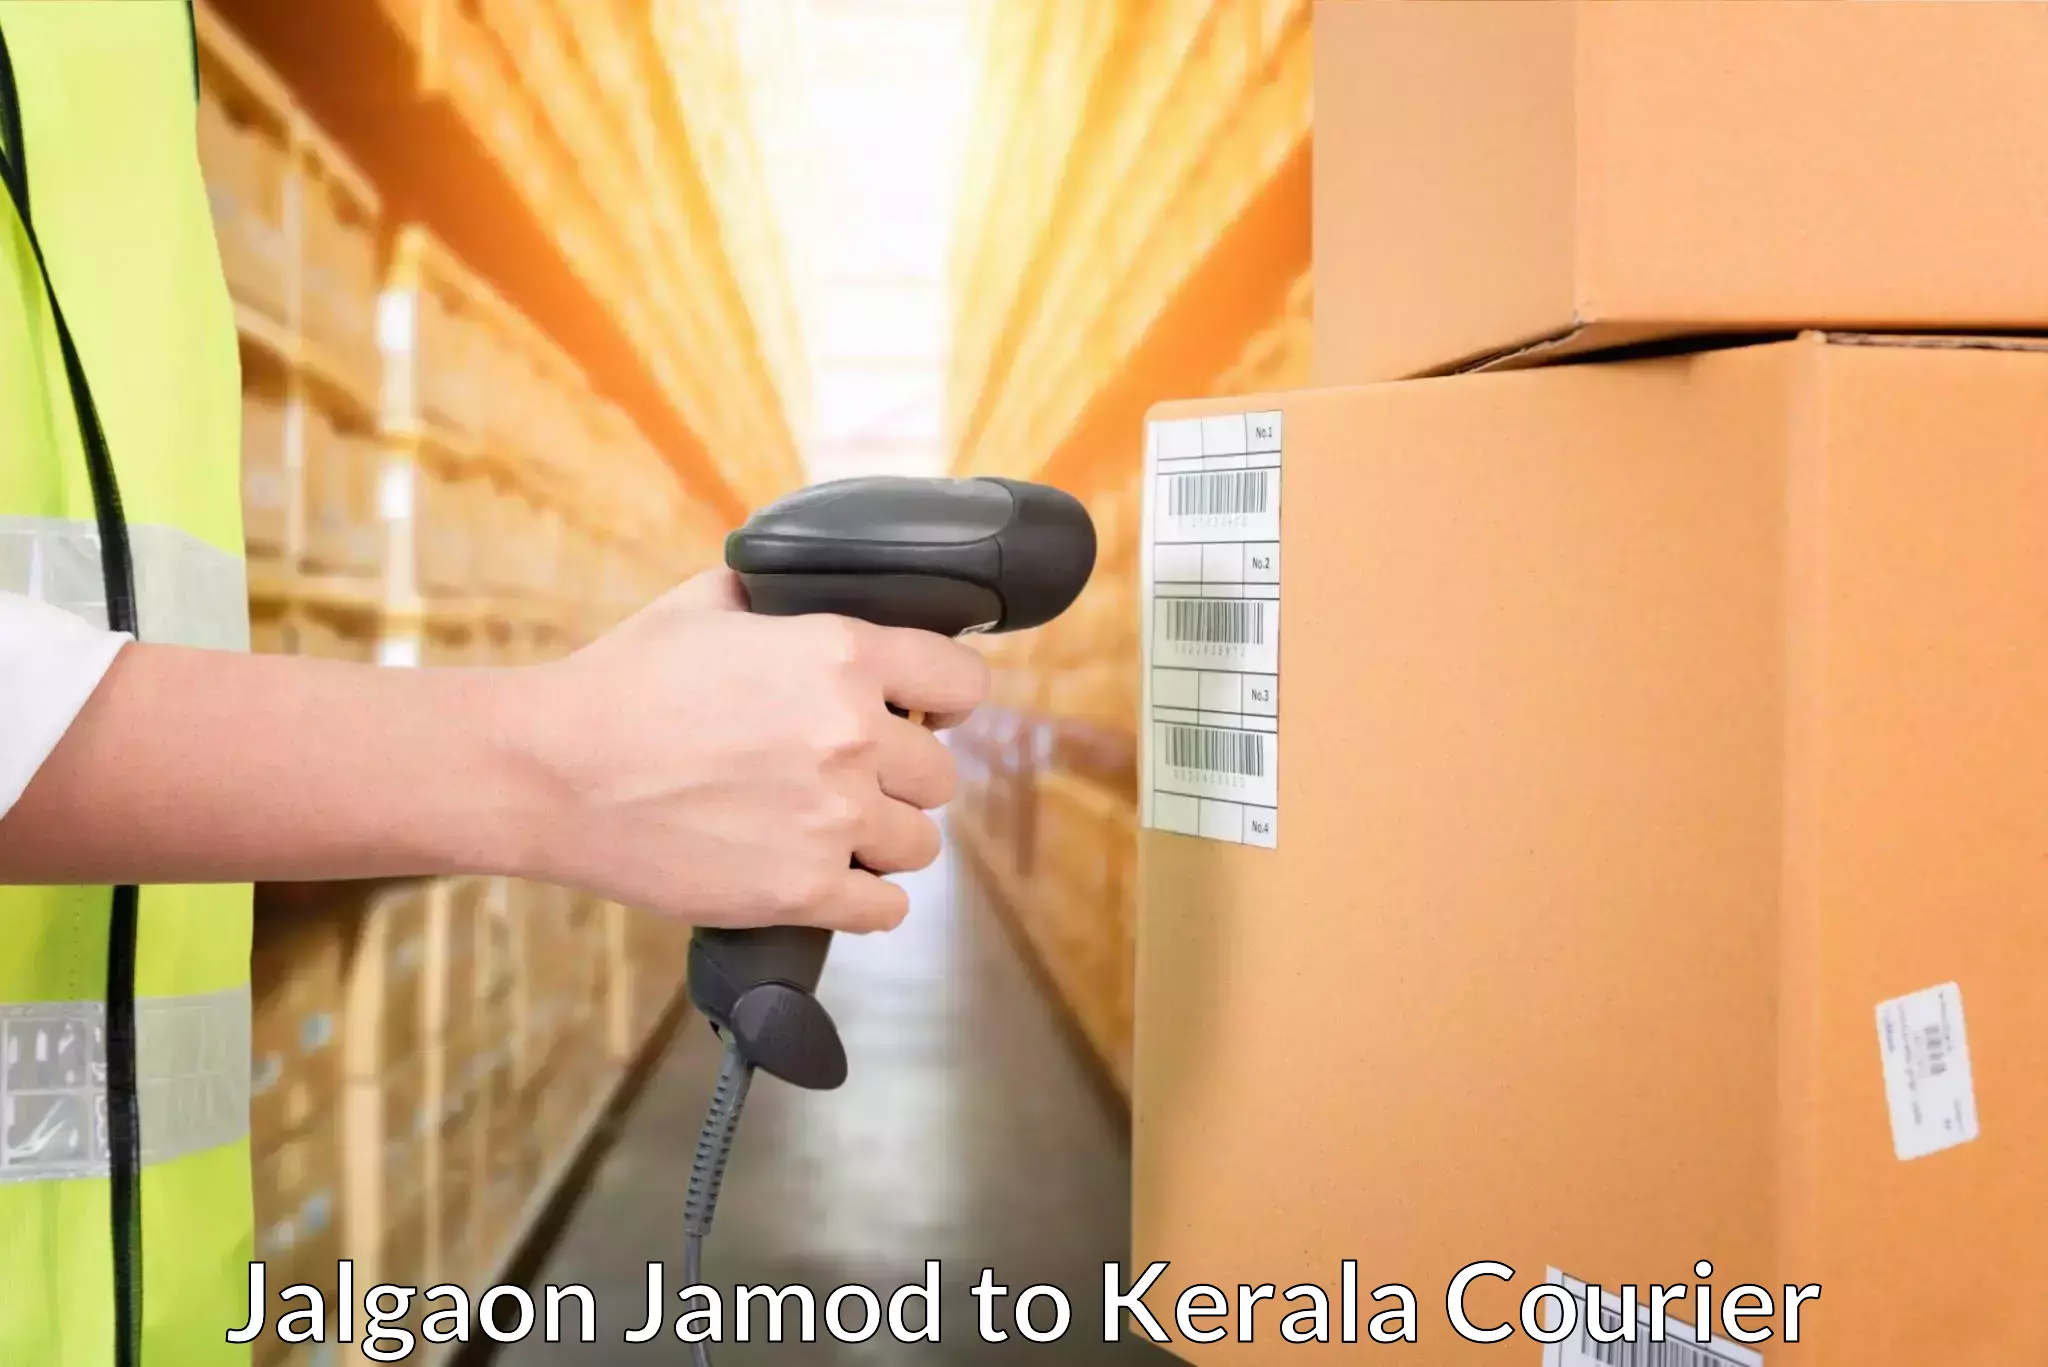 End-to-end delivery in Jalgaon Jamod to Agali